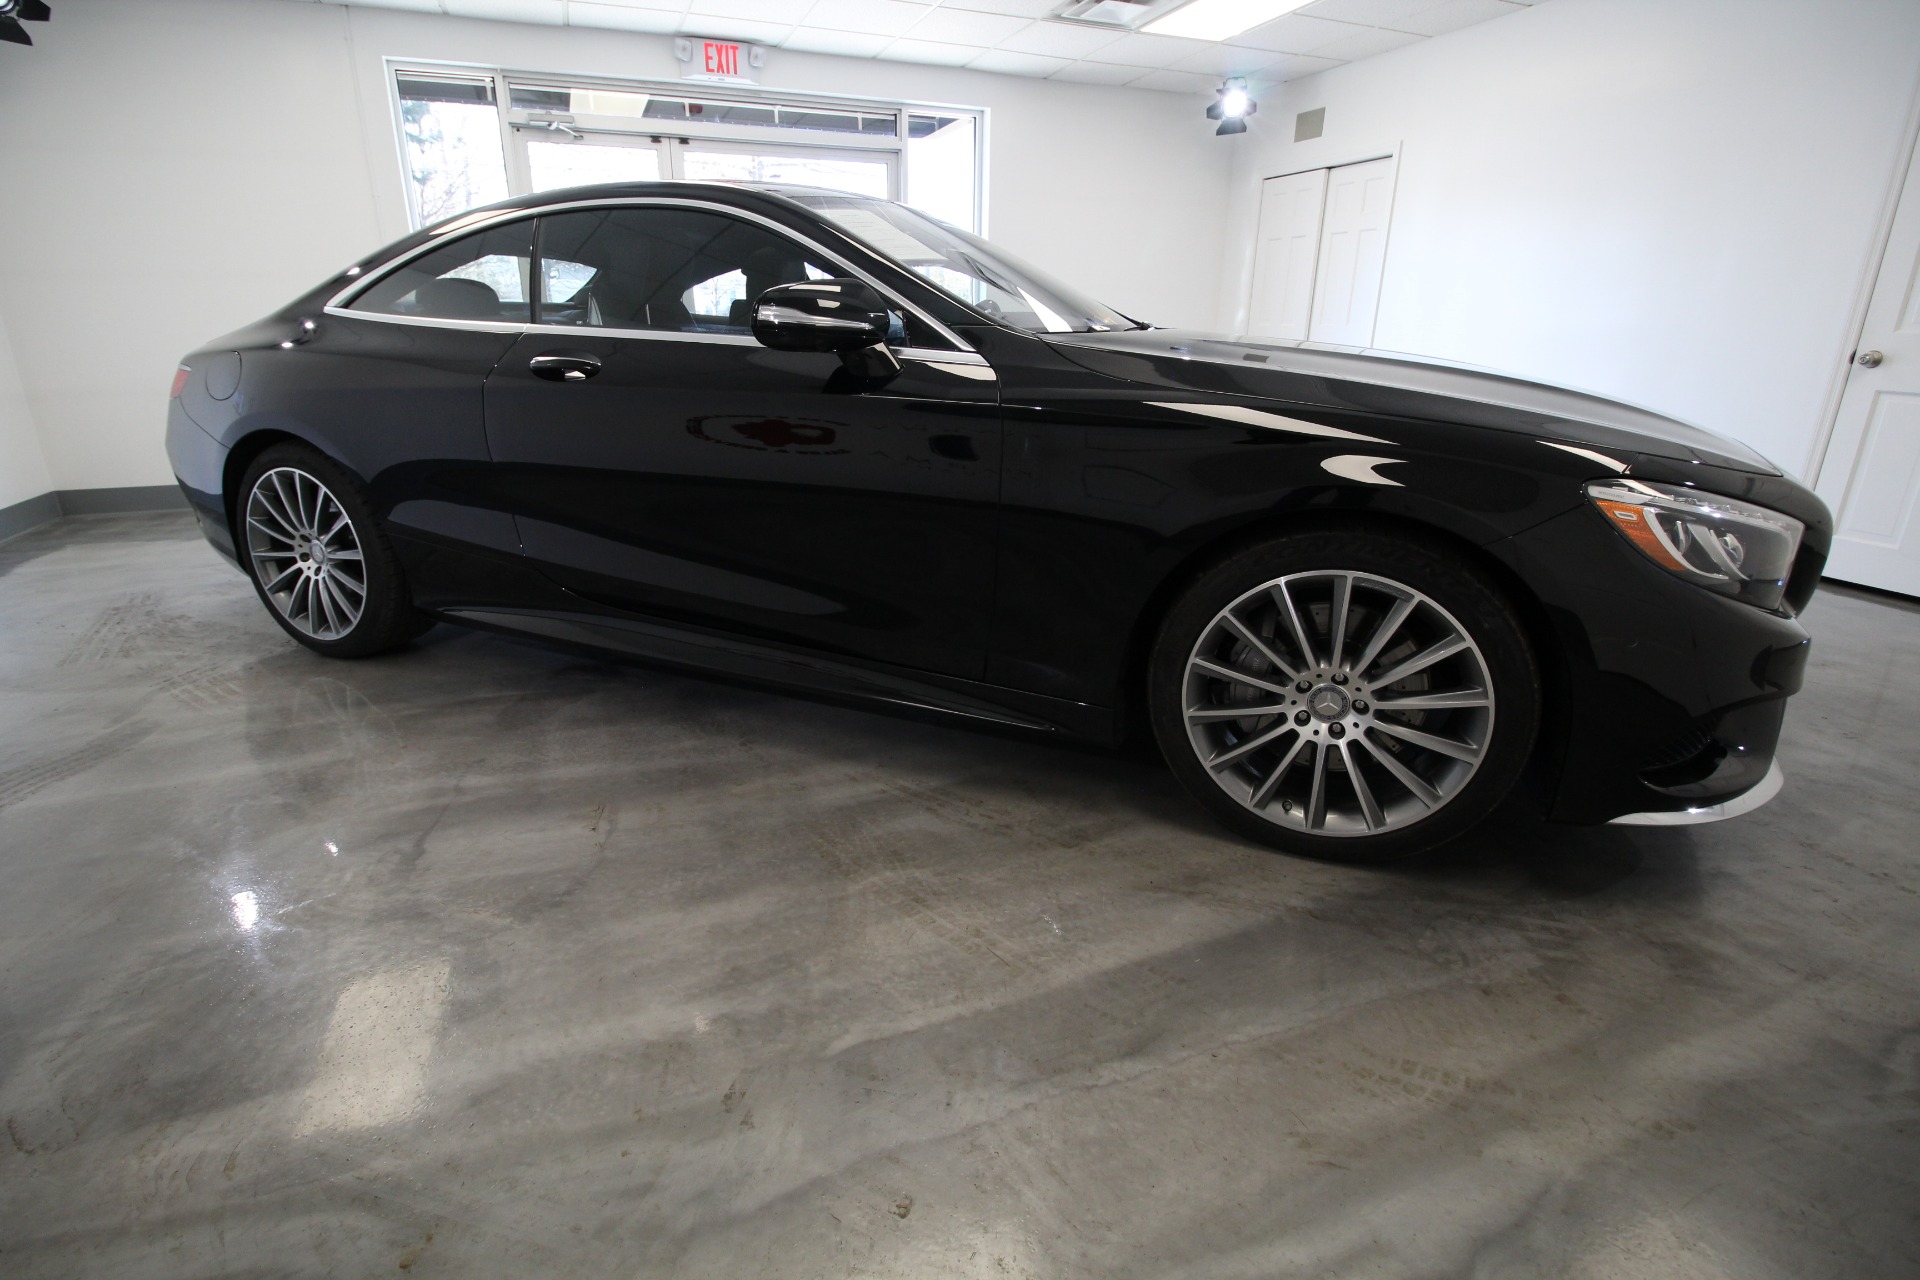 Used 2016 Black Mercedes-Benz S-Class S550 4MATIC COUPE SUPERB INSIDE AND OUT LOW MILES LOCAL CAR | Albany, NY